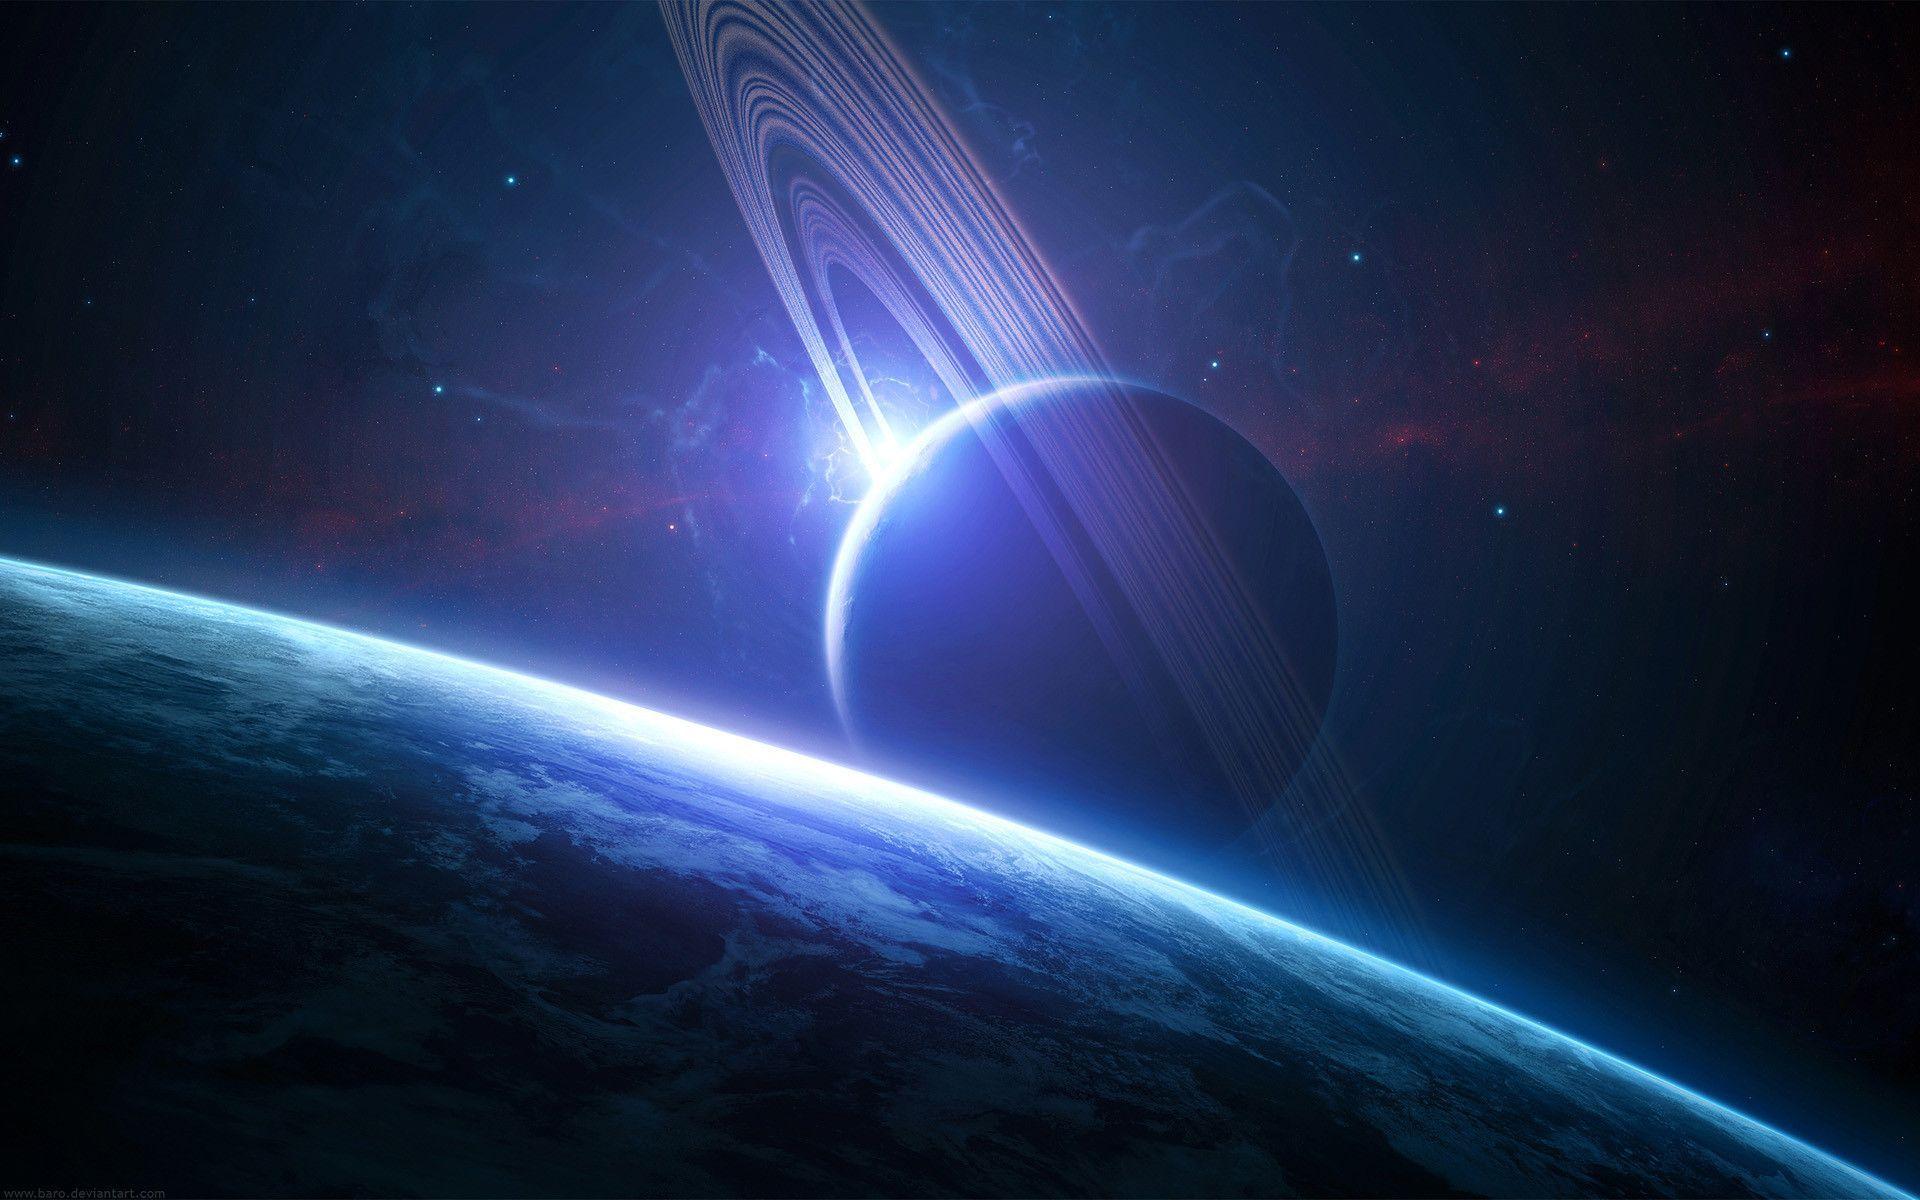 Space Planet Wallpaper, iPhone Wallpaper, Facebook Cover, Twitter